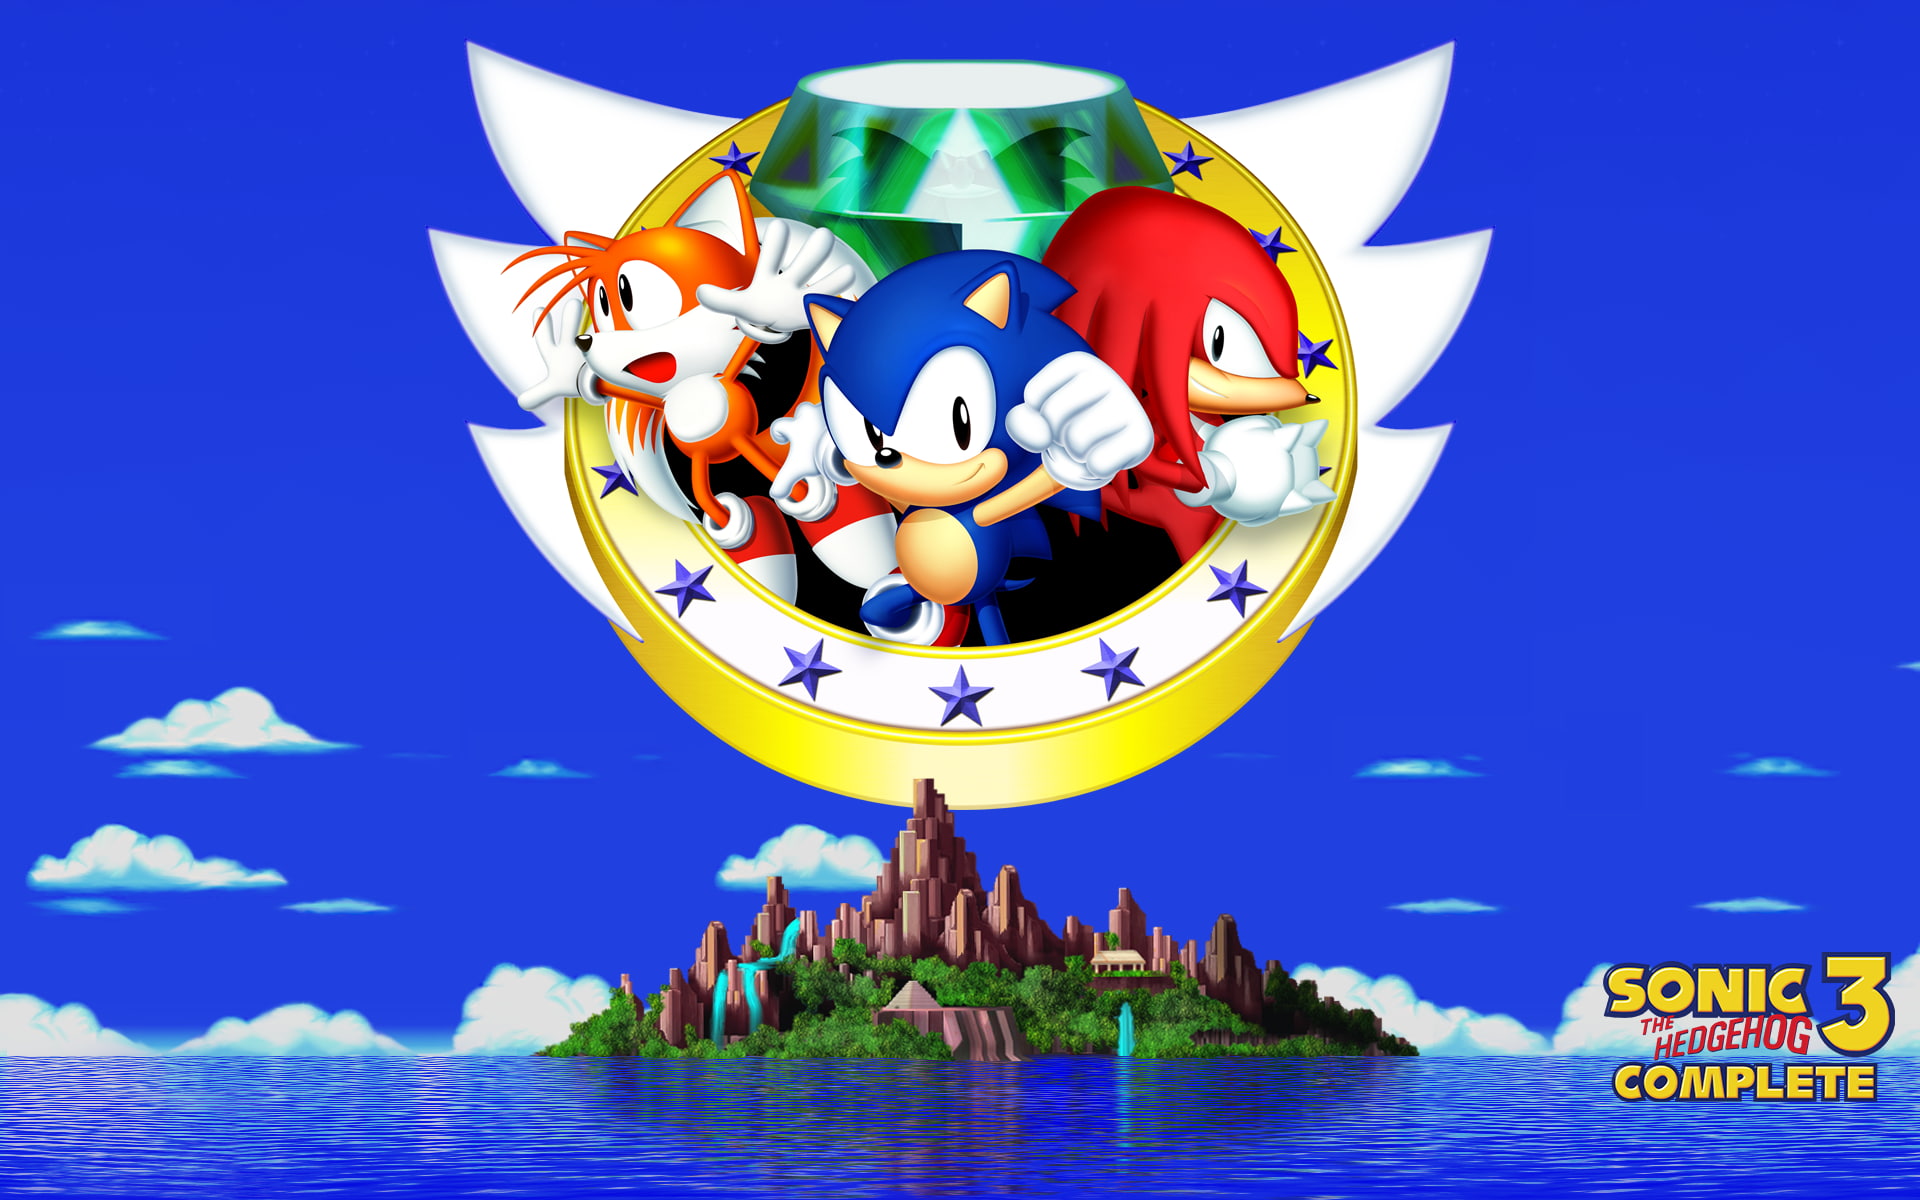 Sonic, Tails (character), Knuckles, water, sky, nature, blue